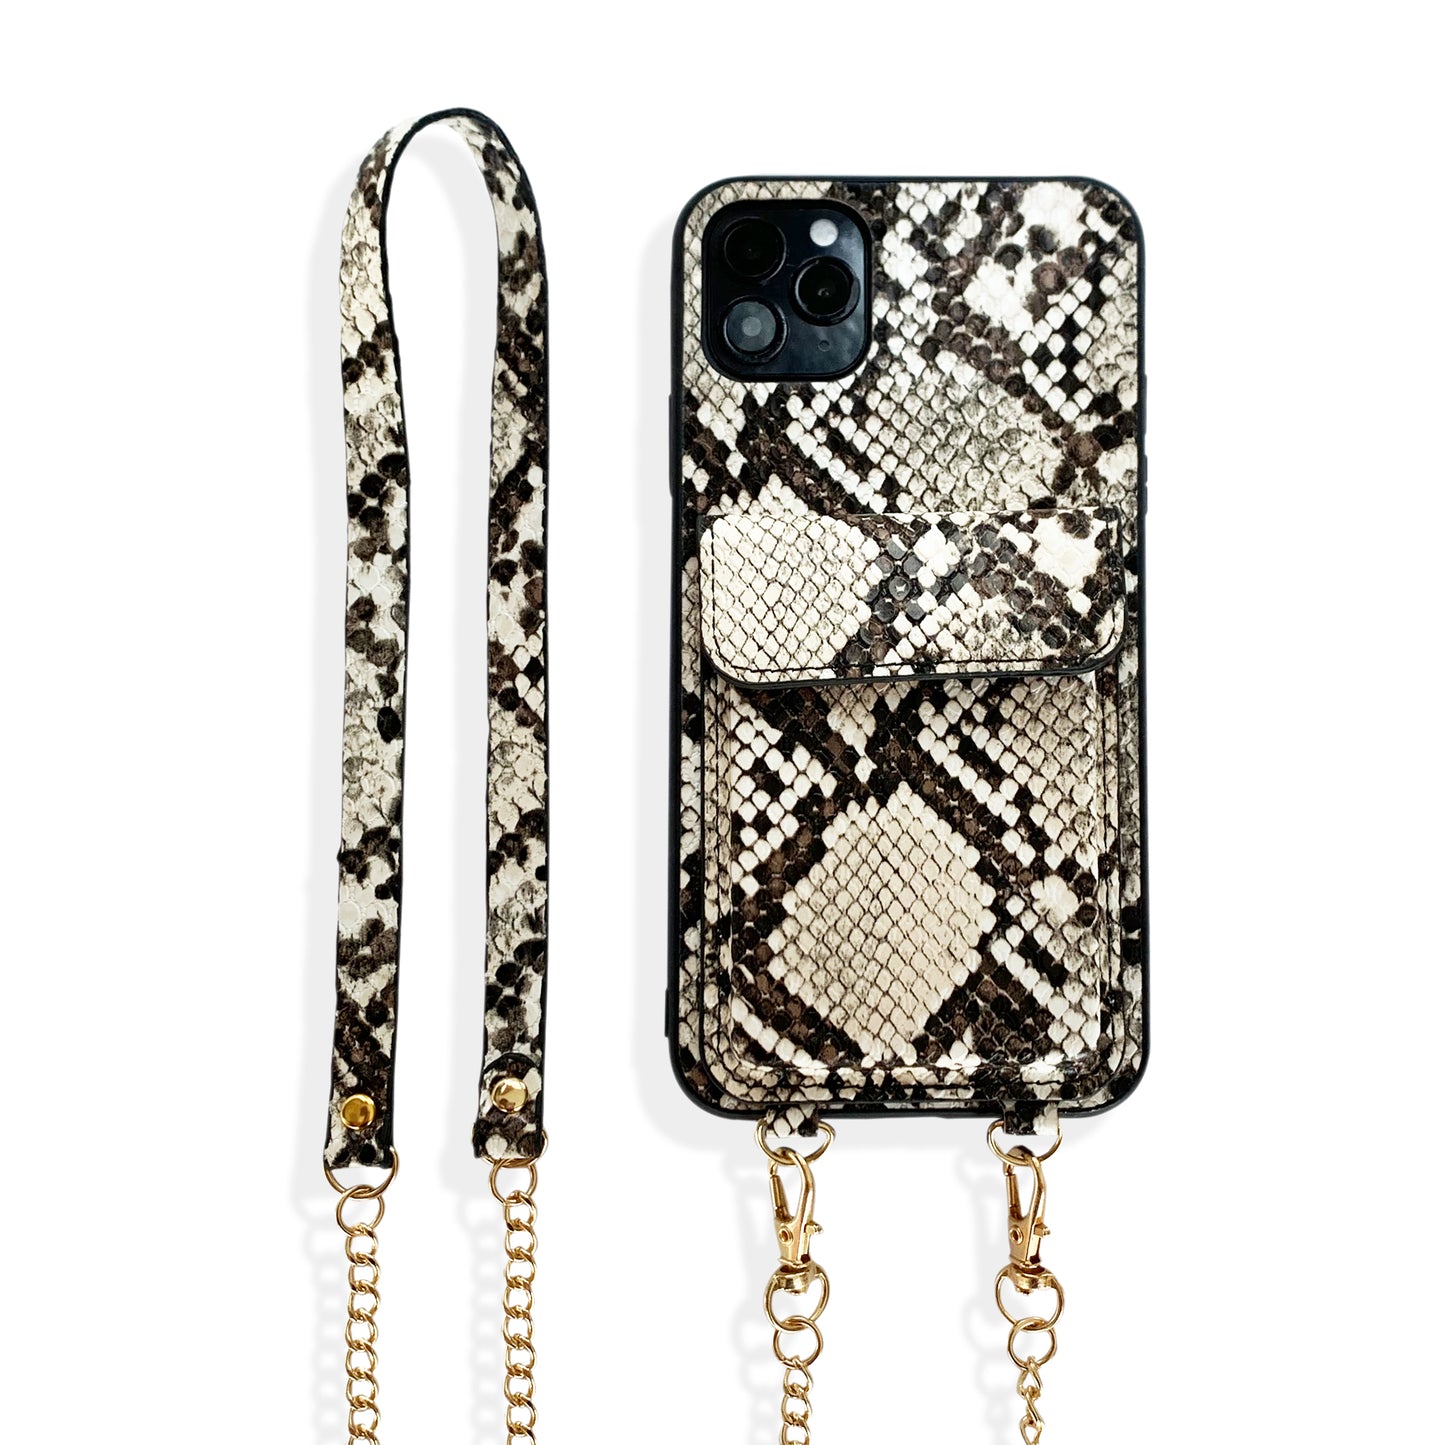 Python Pattern Leather Wallet iPhone Case